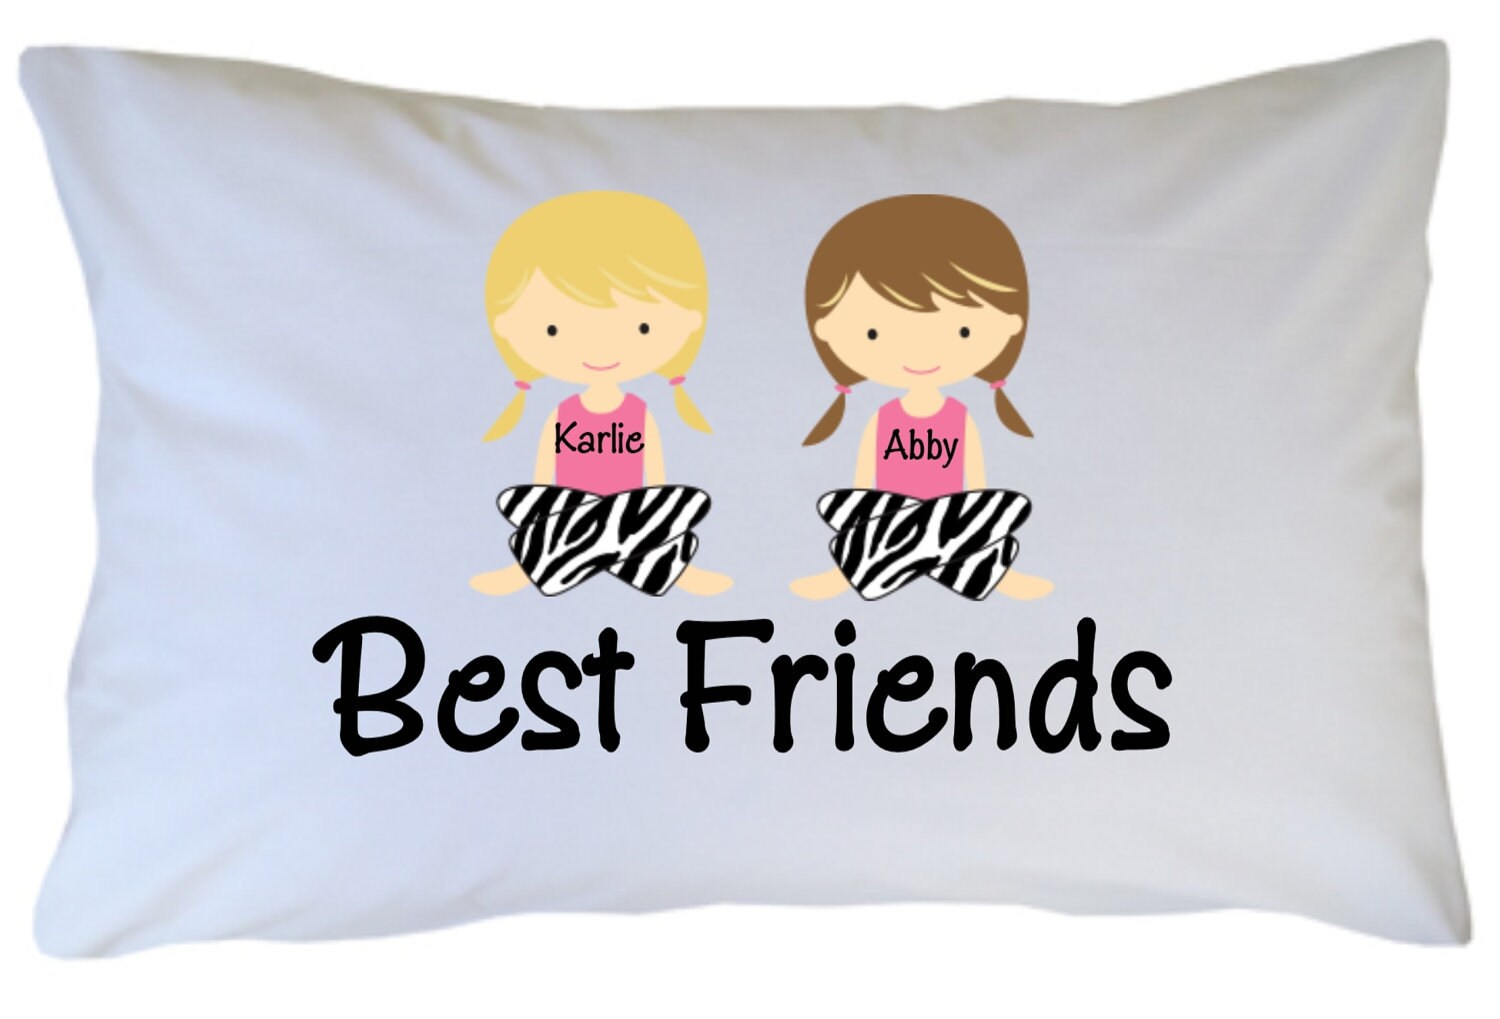 Most of my friends are. Pillow the best friend. Pillow pics for Kids. Best friend picture for Kids. Pillow as your best friend.